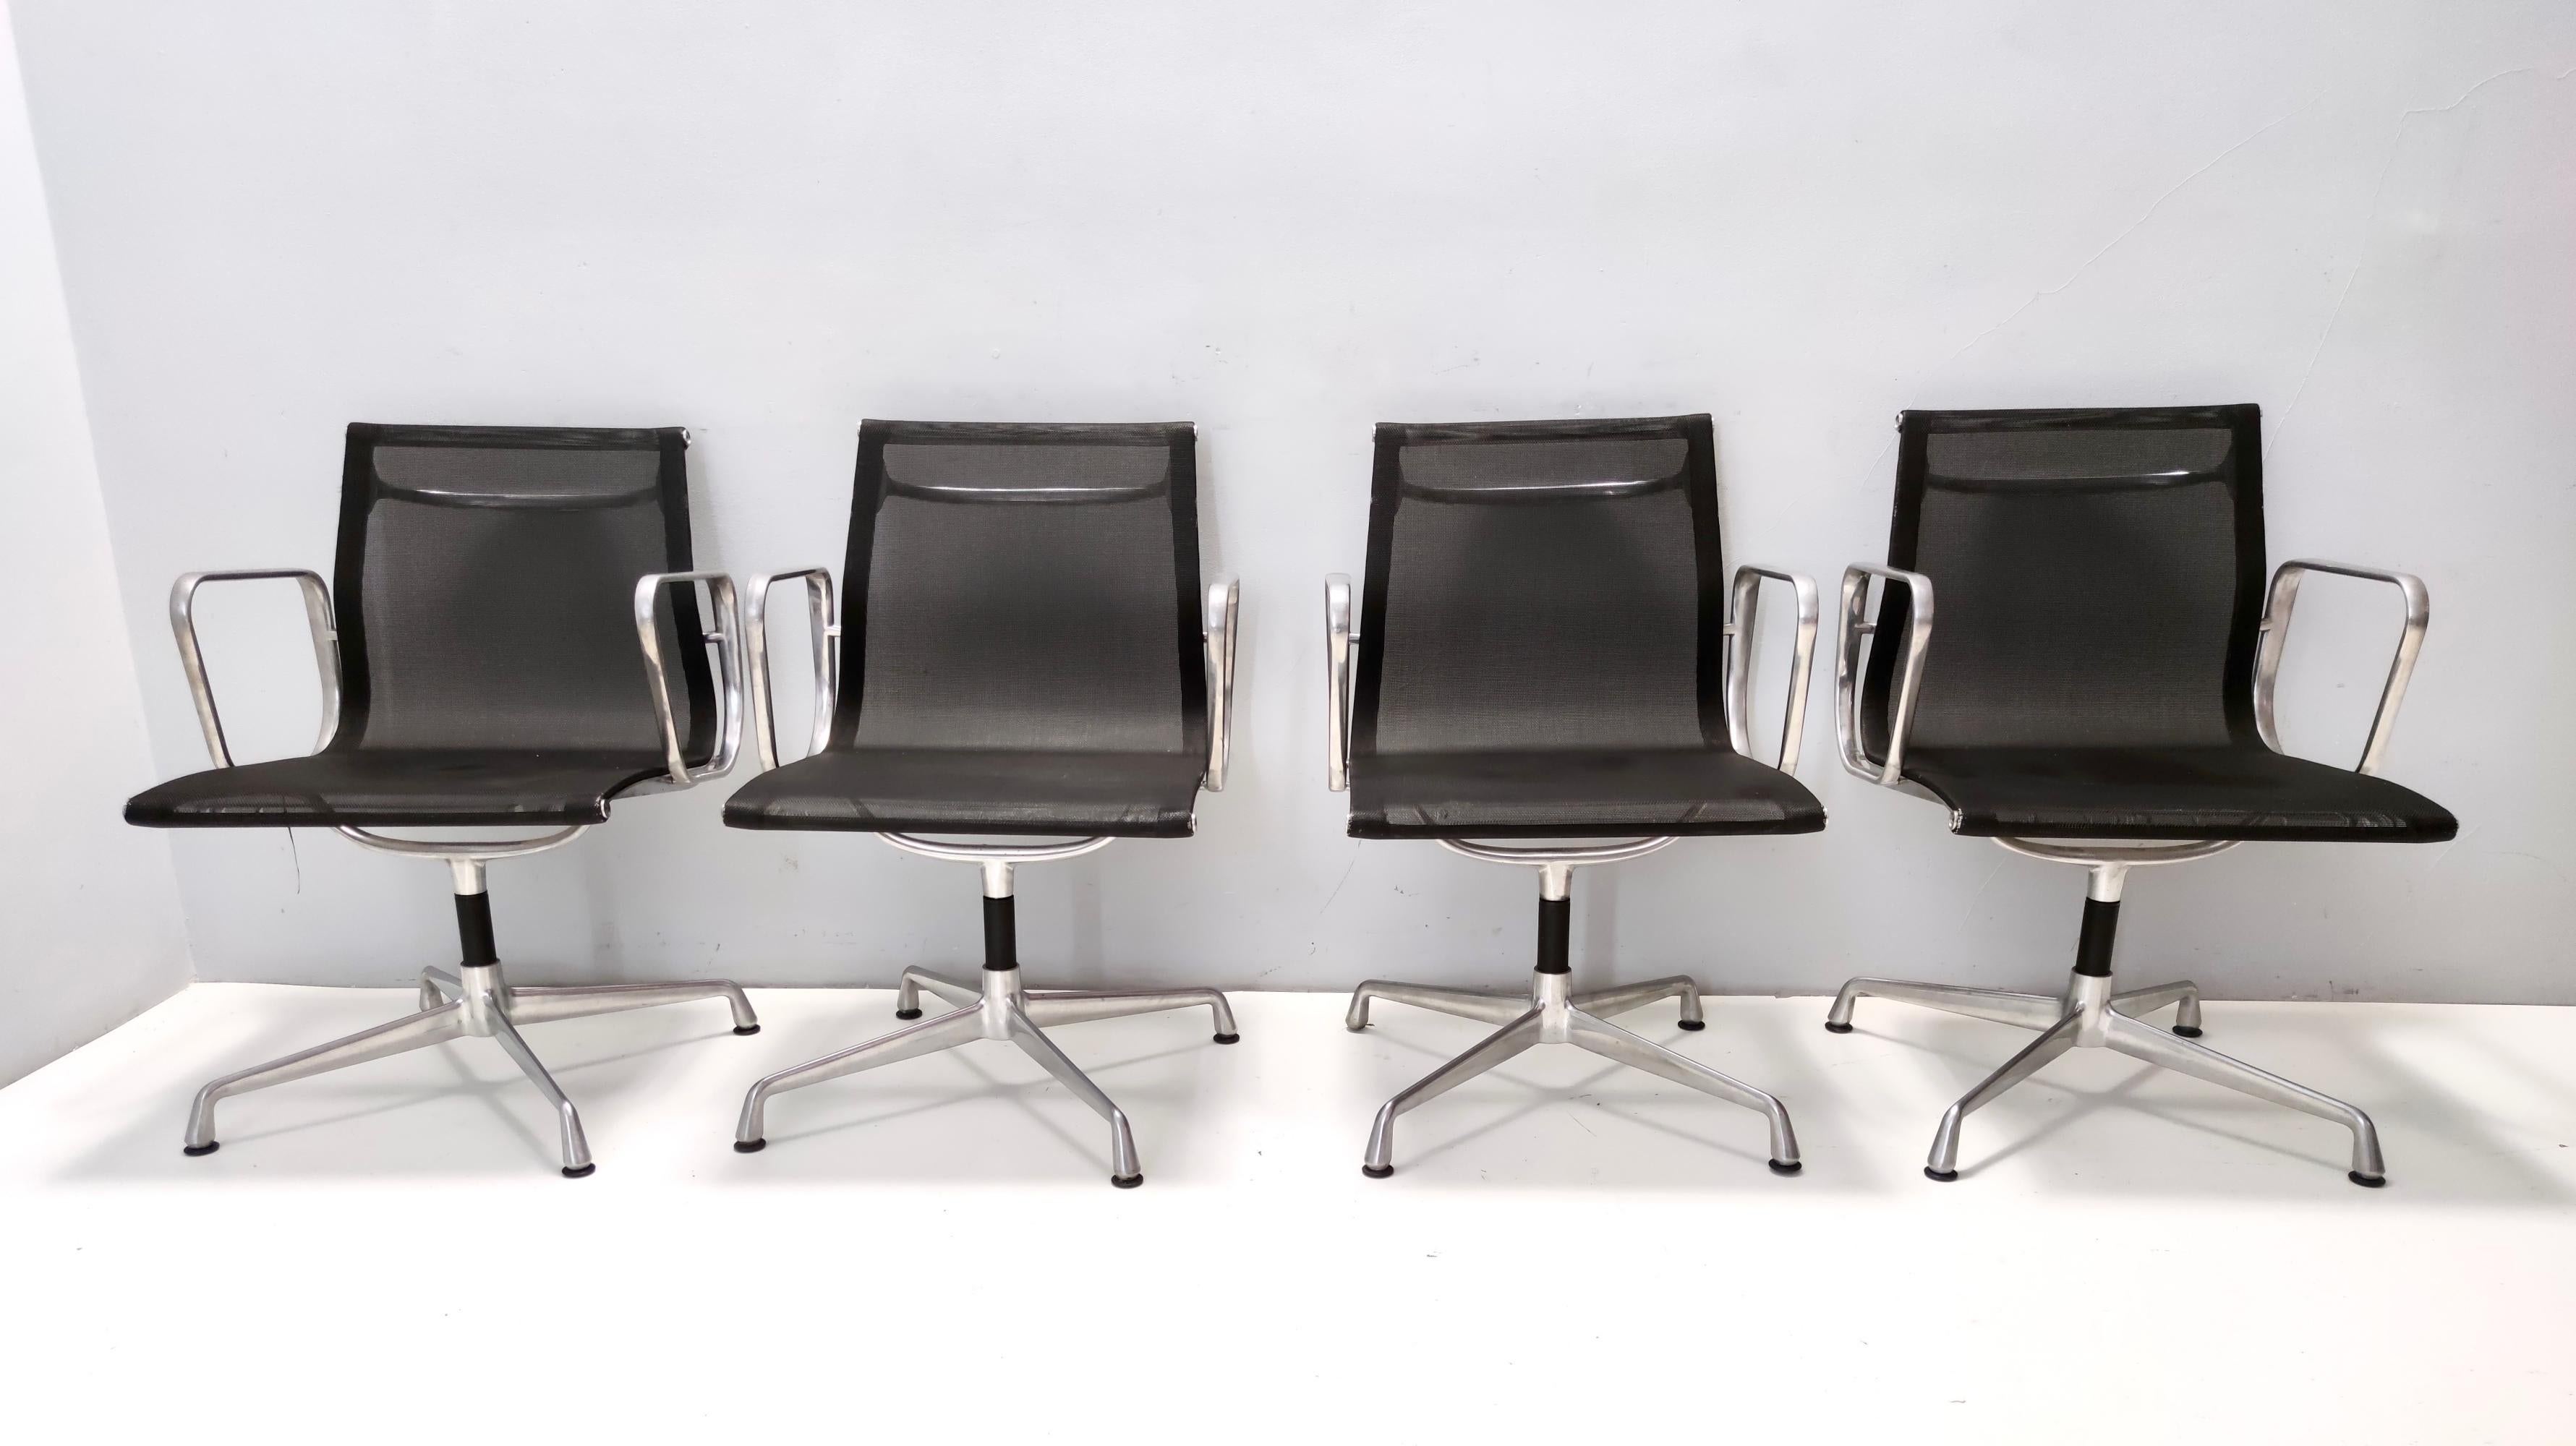 Made in Italy, 1980s. 
These desk chairs feature a black nylon and aluminum frame. 
They are revolving but not reclining, and height is not adjustable. 
This set might show slight traces of use since it's vintage, but it can be considered as in